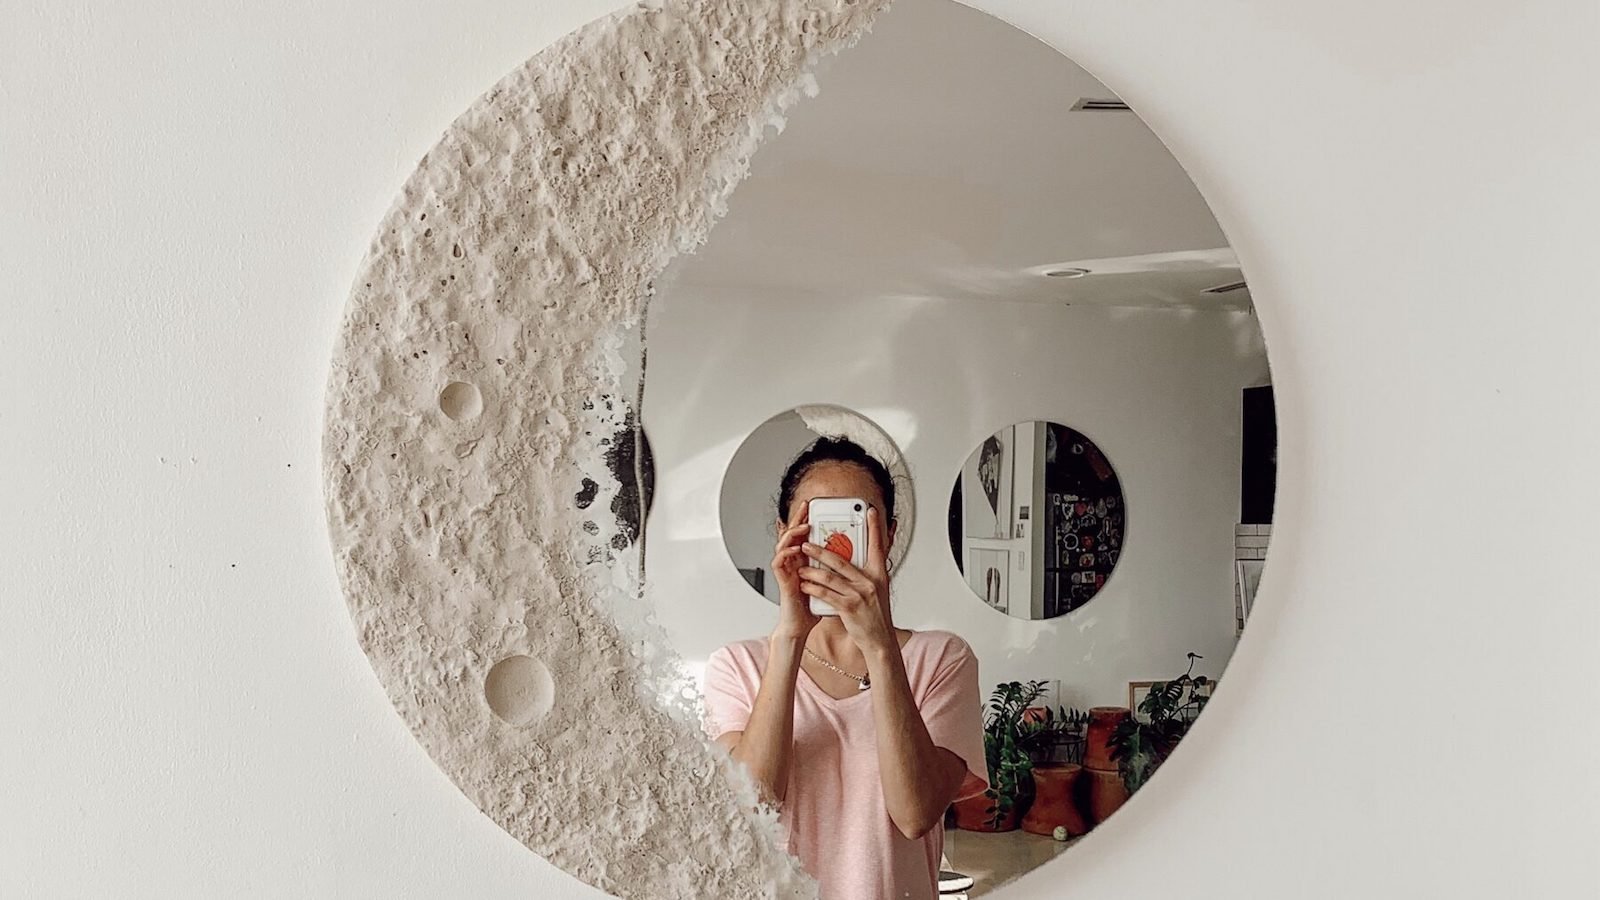 This HER unique mirror updates your home’s decor instantly